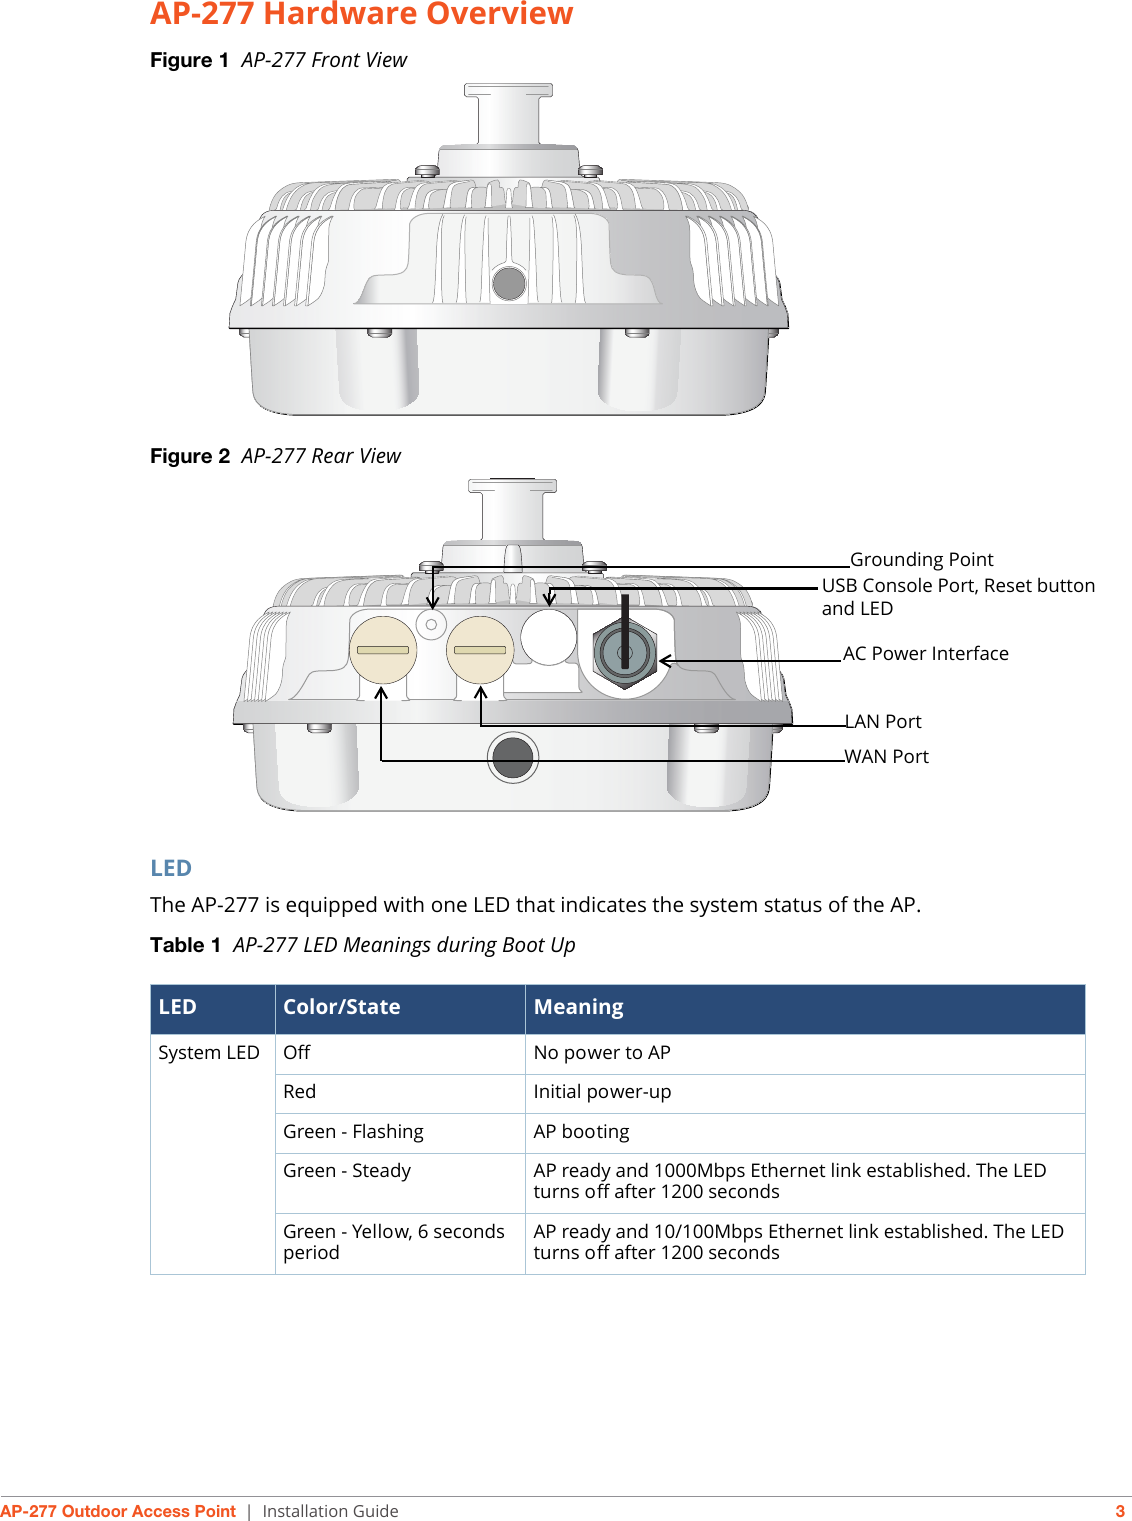 AP-277 Outdoor Access Point | Installation Guide 3AP-277 Hardware OverviewFigure 1  AP-277 Front View Figure 2  AP-277 Rear ViewLED The AP-277 is equipped with one LED that indicates the system status of the AP.Table 1  AP-277 LED Meanings during Boot UpLED Color/State MeaningSystem LED Off No power to APRed Initial power-up Green - Flashing AP bootingGreen - Steady AP ready and 1000Mbps Ethernet link established. The LED turns off after 1200 secondsGreen - Yellow, 6 seconds period AP ready and 10/100Mbps Ethernet link established. The LED turns off after 1200 secondsAC Power InterfaceLAN PortWAN PortGrounding PointUSB Console Port, Reset button and LED